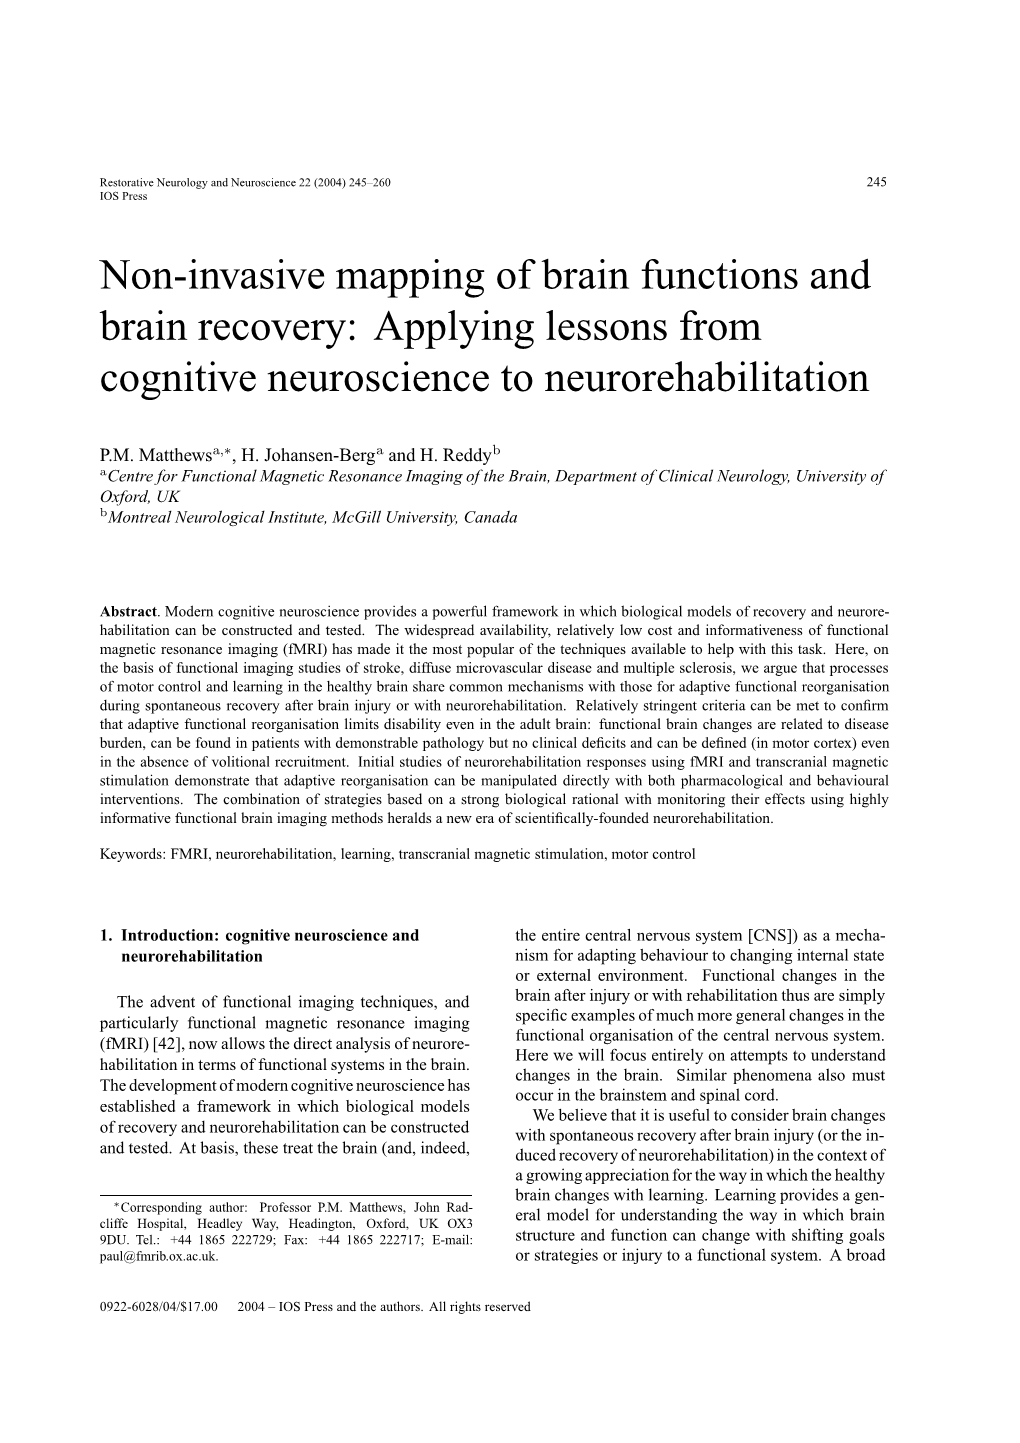 Non-Invasive Mapping of Brain Functions and Brain Recovery: Applying Lessons from Cognitive Neuroscience to Neurorehabilitation